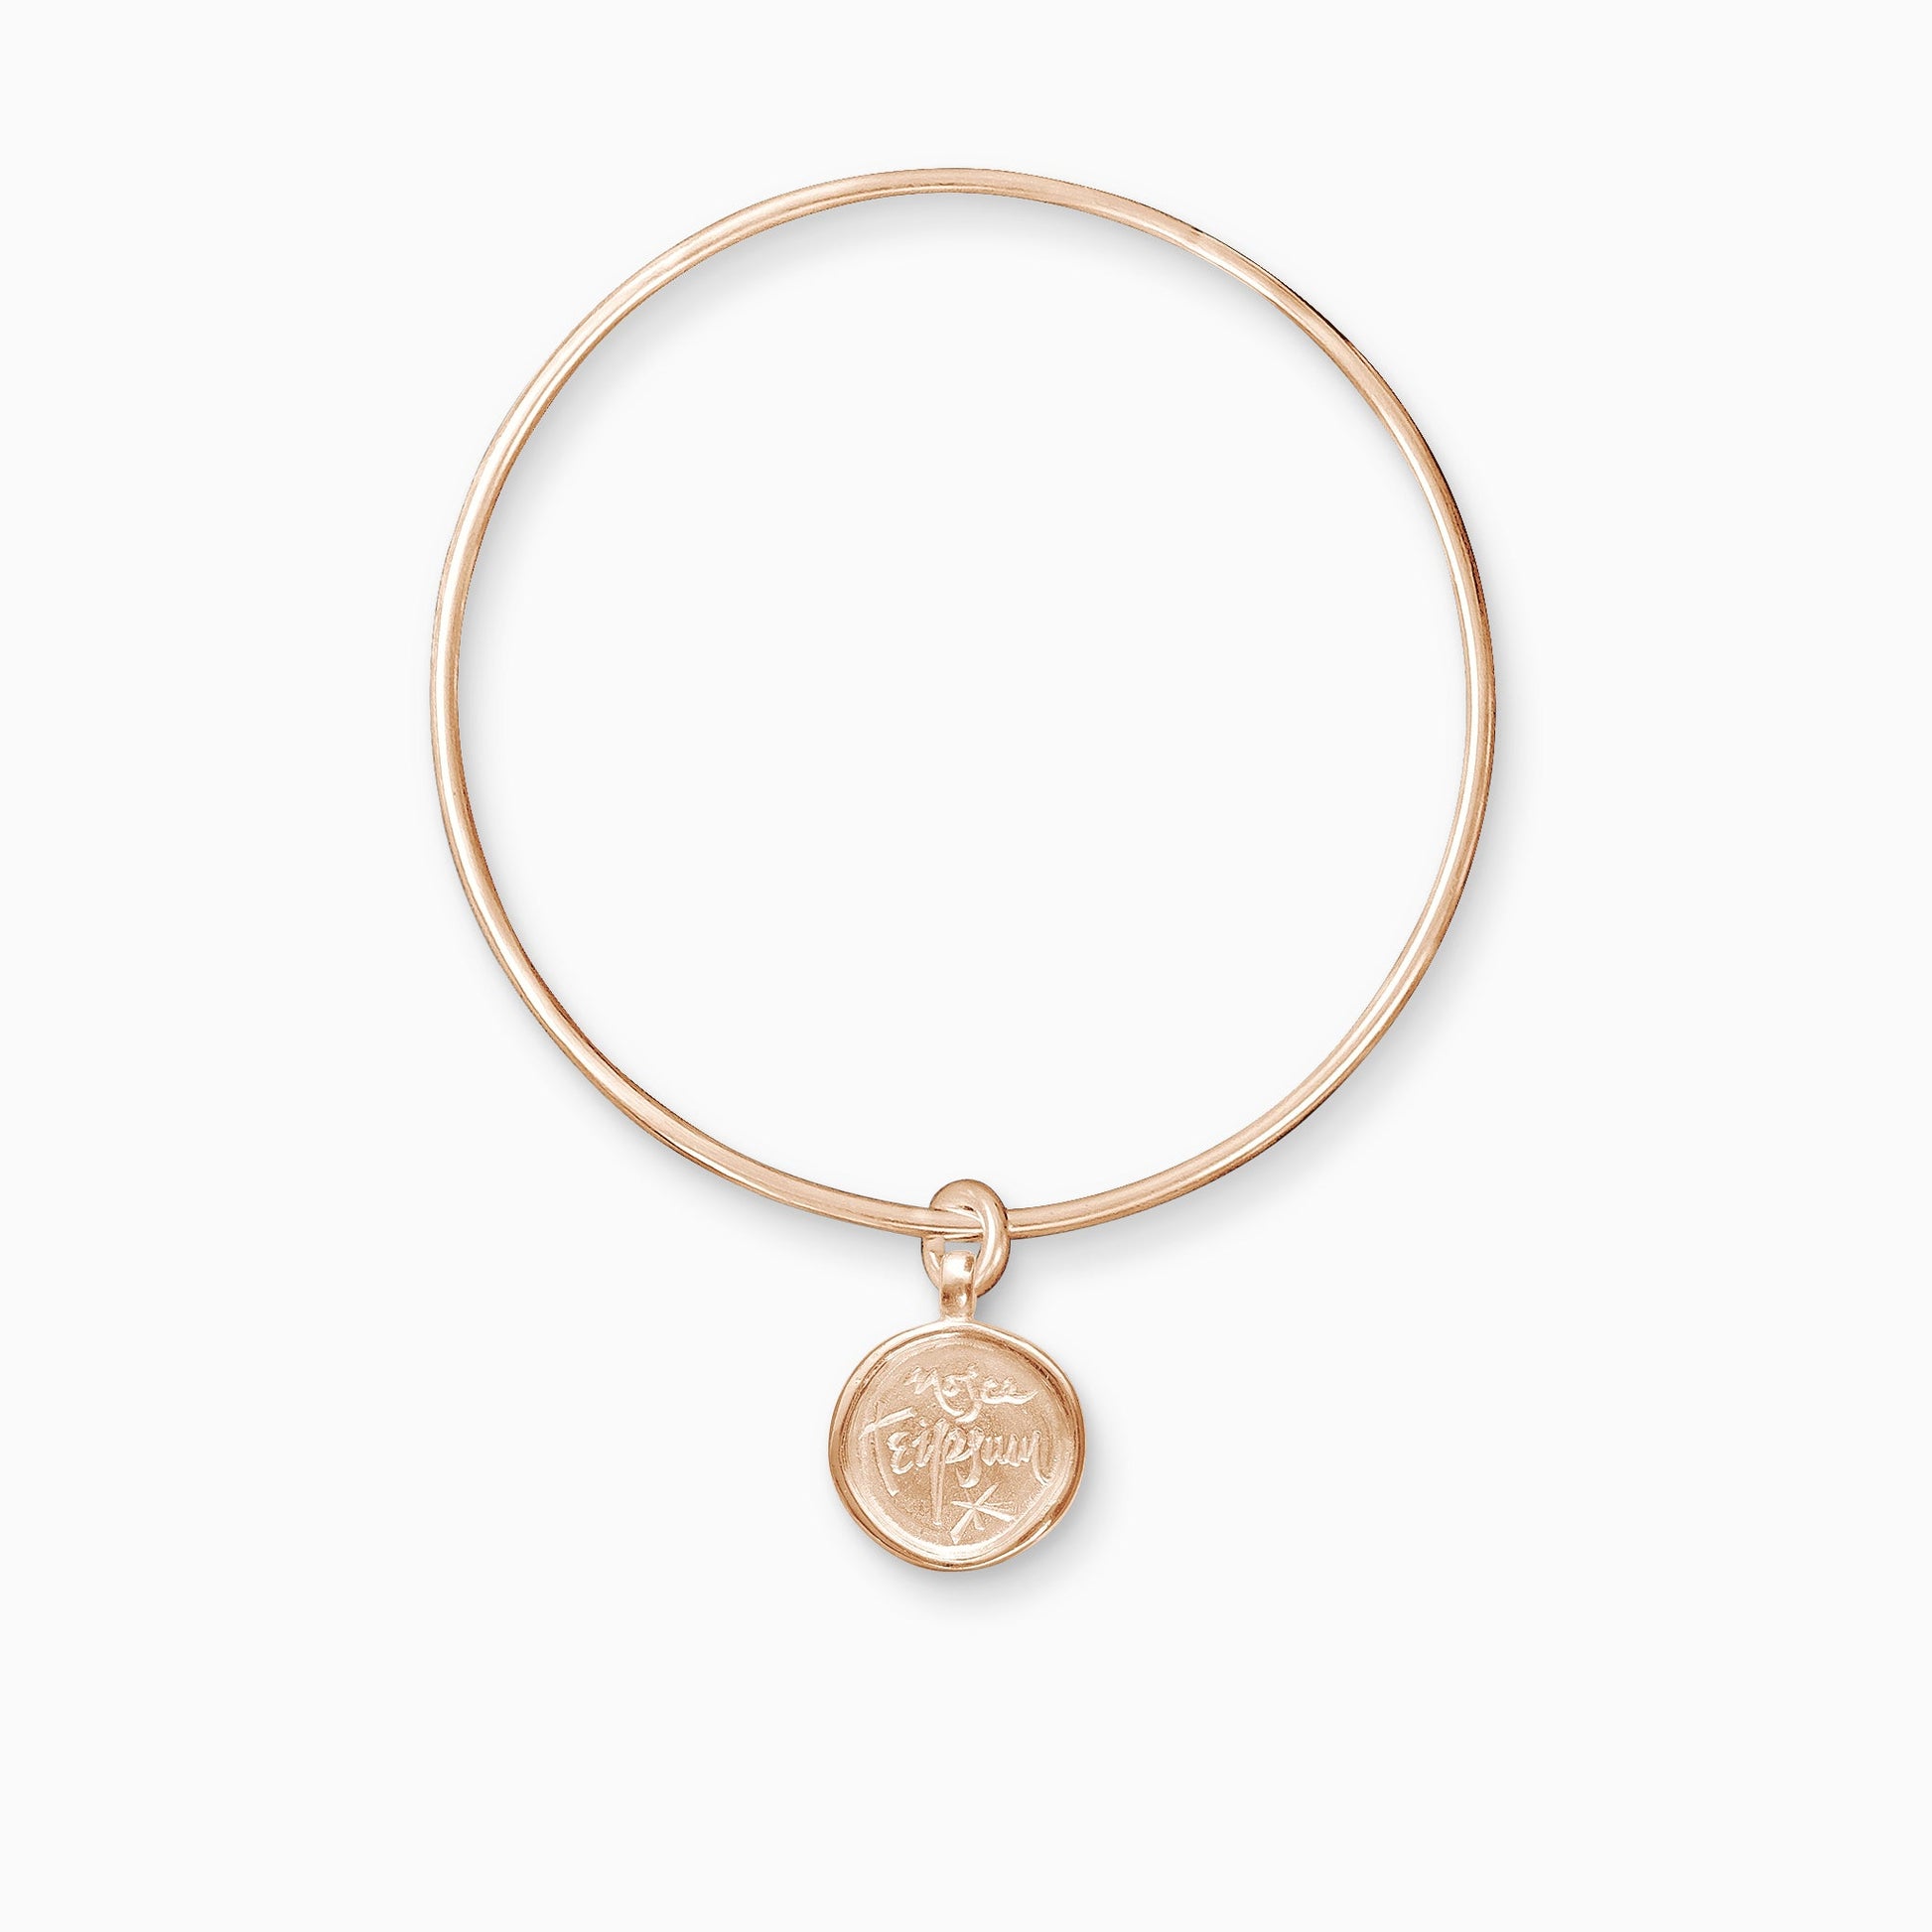 An 18ct Fairtrade rose gold round charm with a raised edge engraved with ‘Know Thyself’ freely moving on a round wire bangle.  Charm 15mm. Bangle 63mm inside diameter x 2mm round wire.